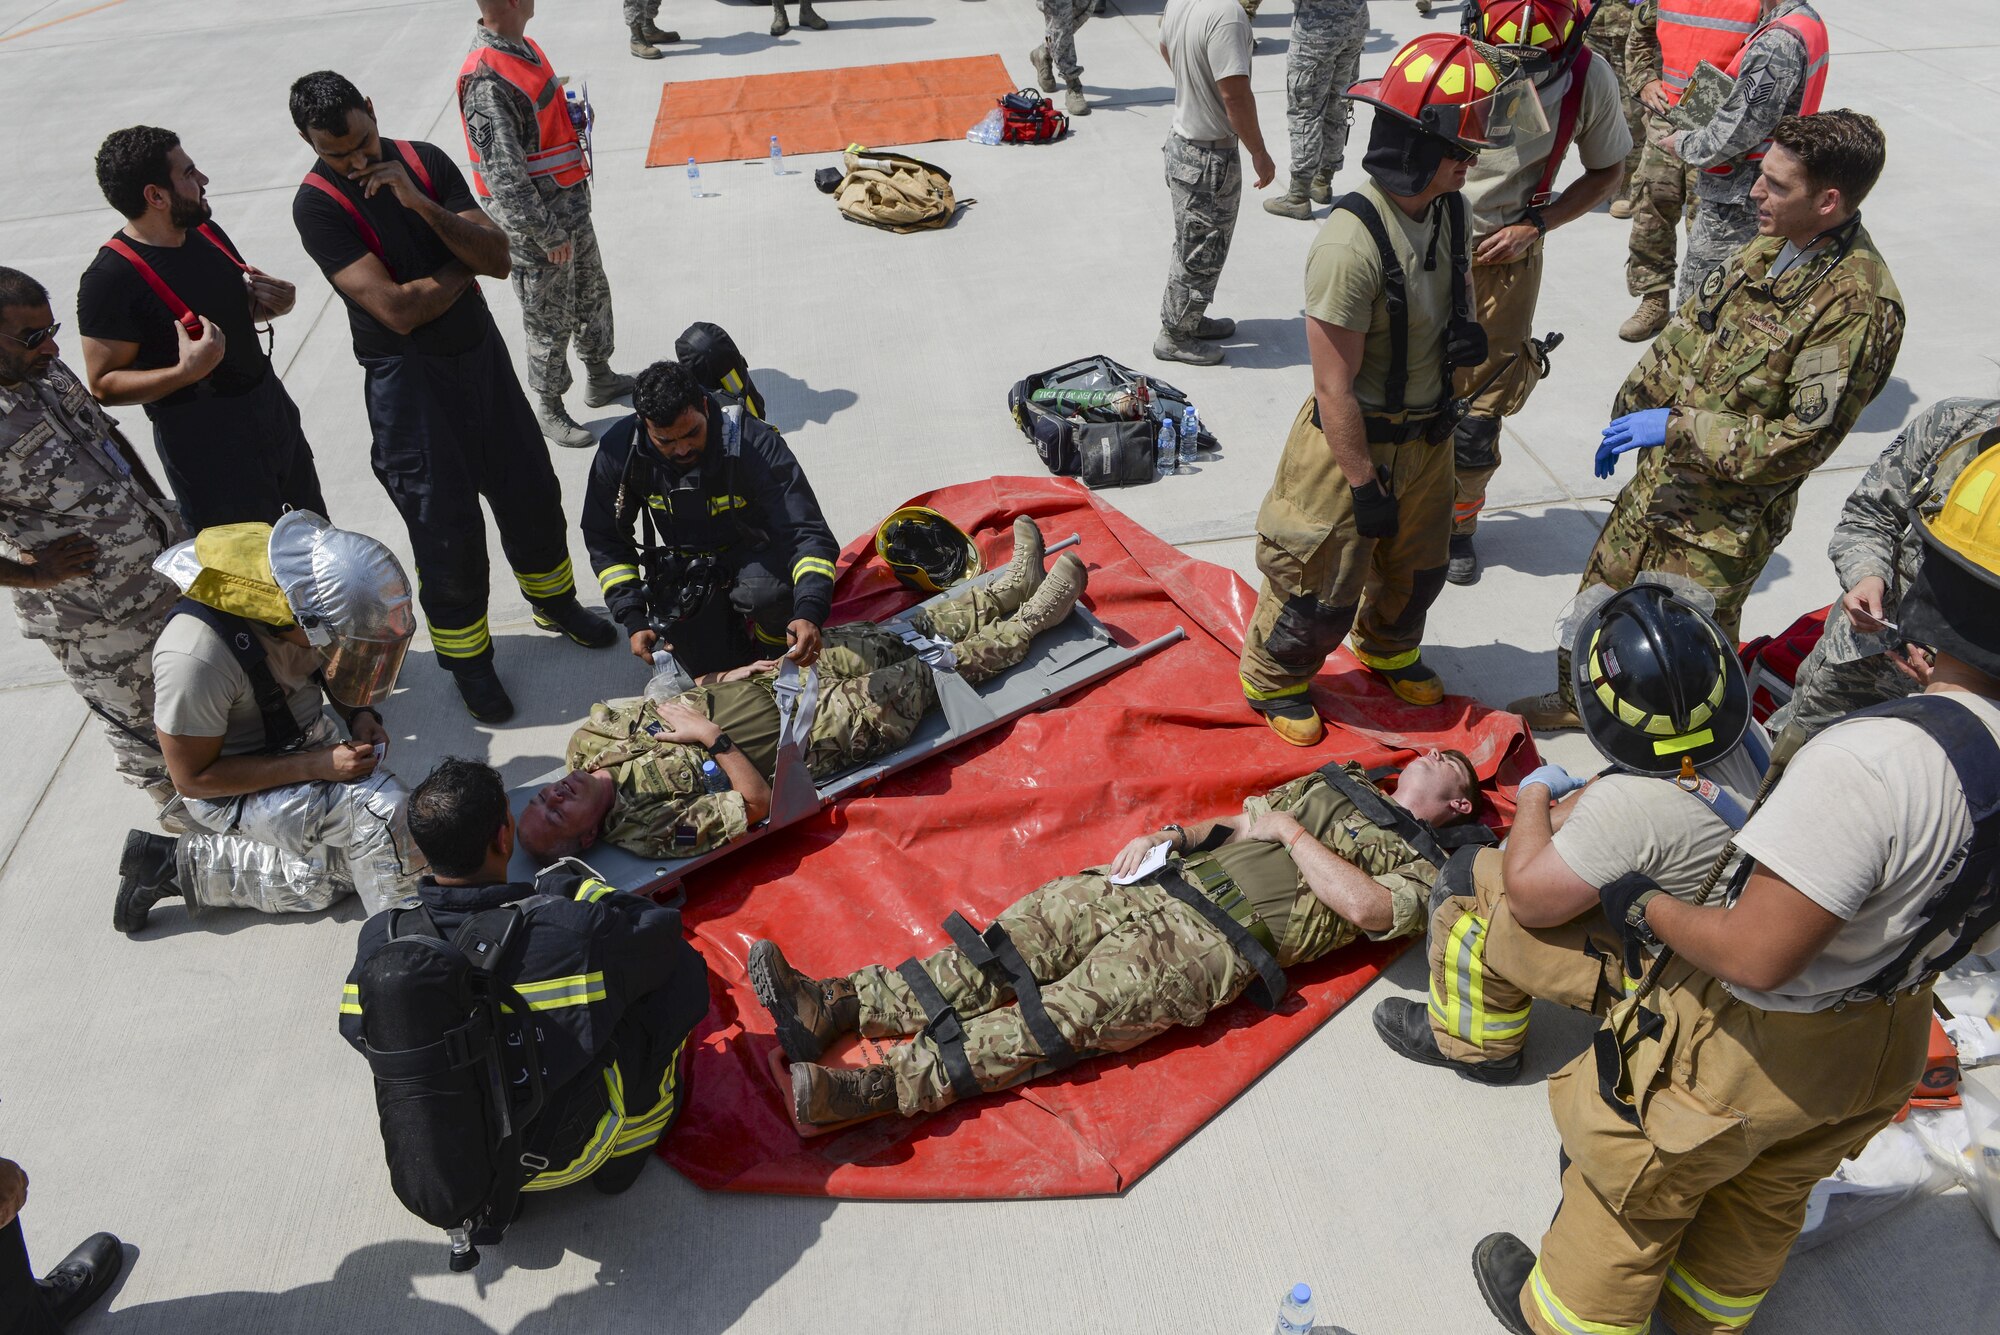 Members of the U.S. Air Force, Royal Air Force, and Qatar Emiri Air Force take part in responding too, and evaluating the response too, a simulated aircraft accident on the runway at Al Udeid Air Base, Qatar, Oct. 3, 2017.